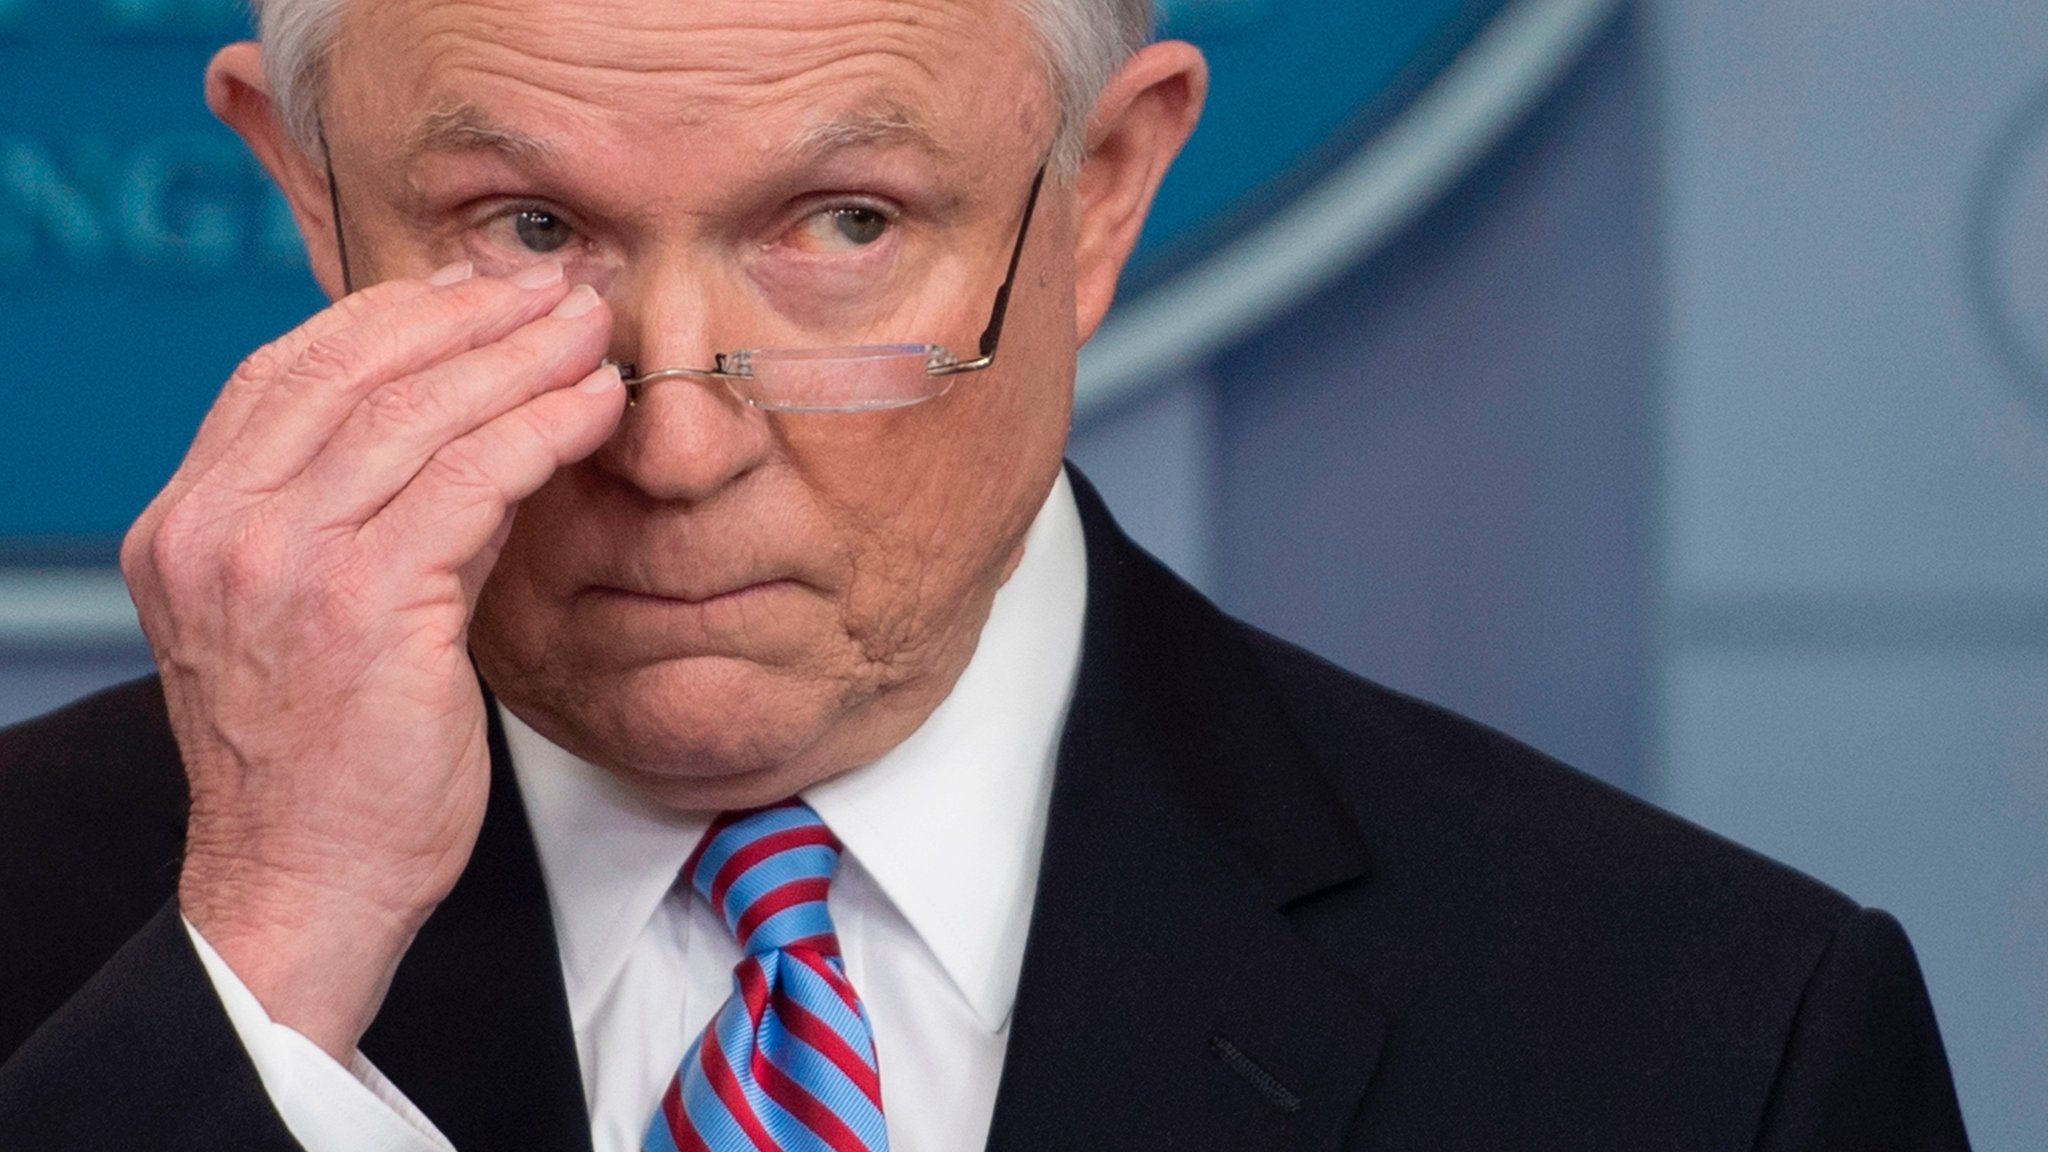 Jeff Sessions at a White House briefing on 27 March, 2017.